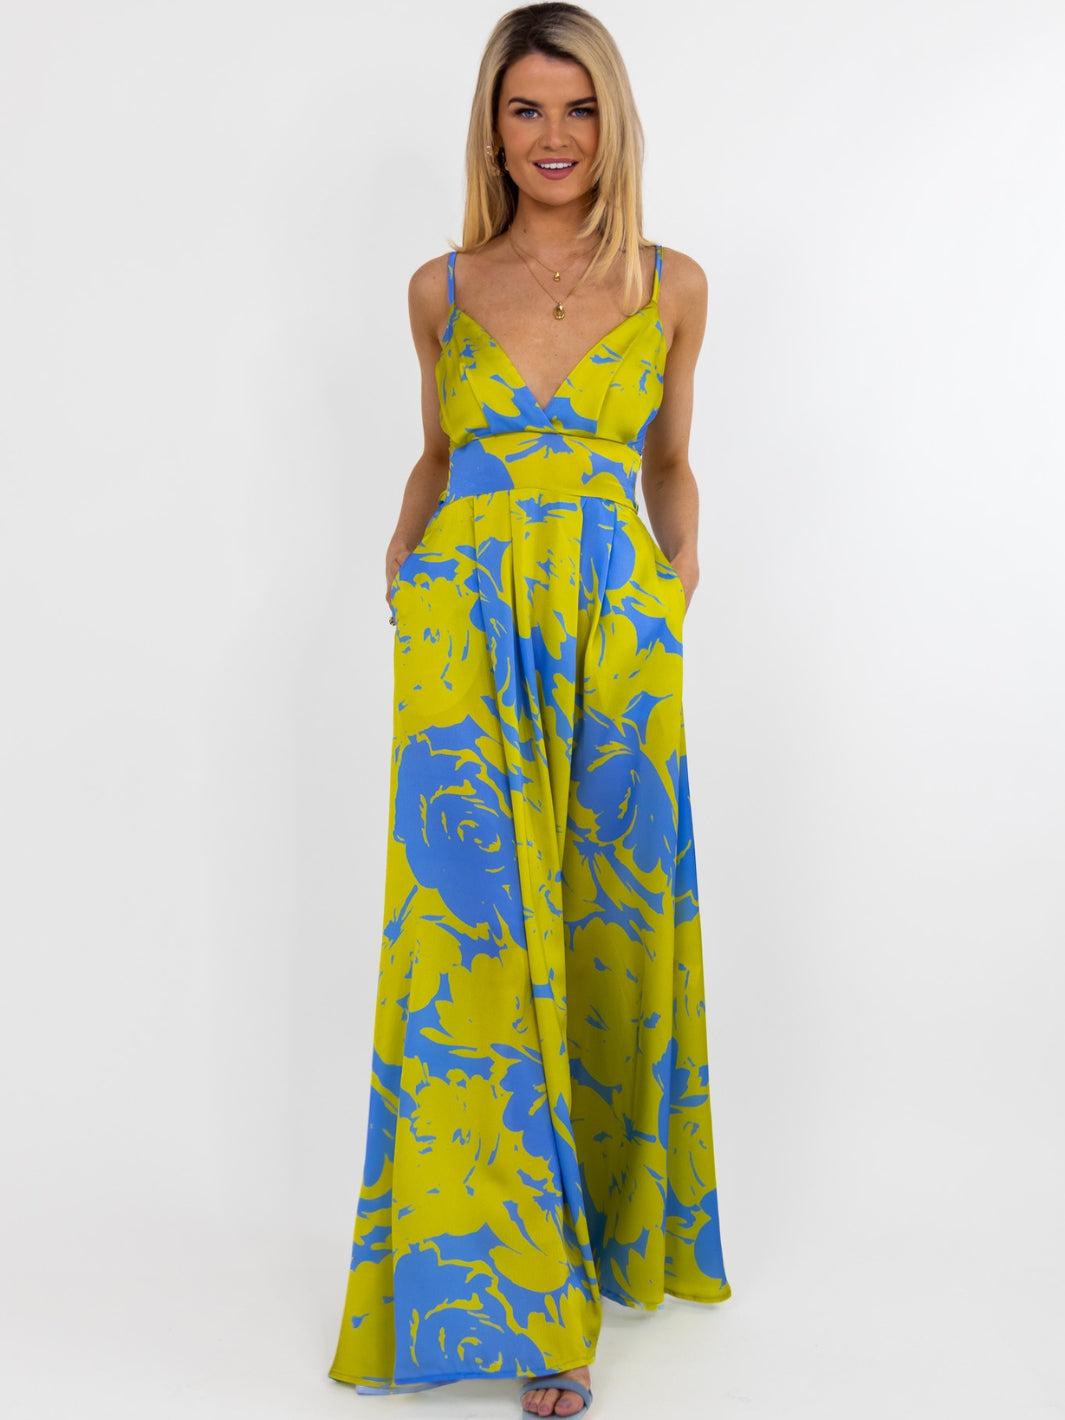 Kate & Pippa Lola Maxi Dress In Sky Blue / Yellow Floral Print-Nicola Ross